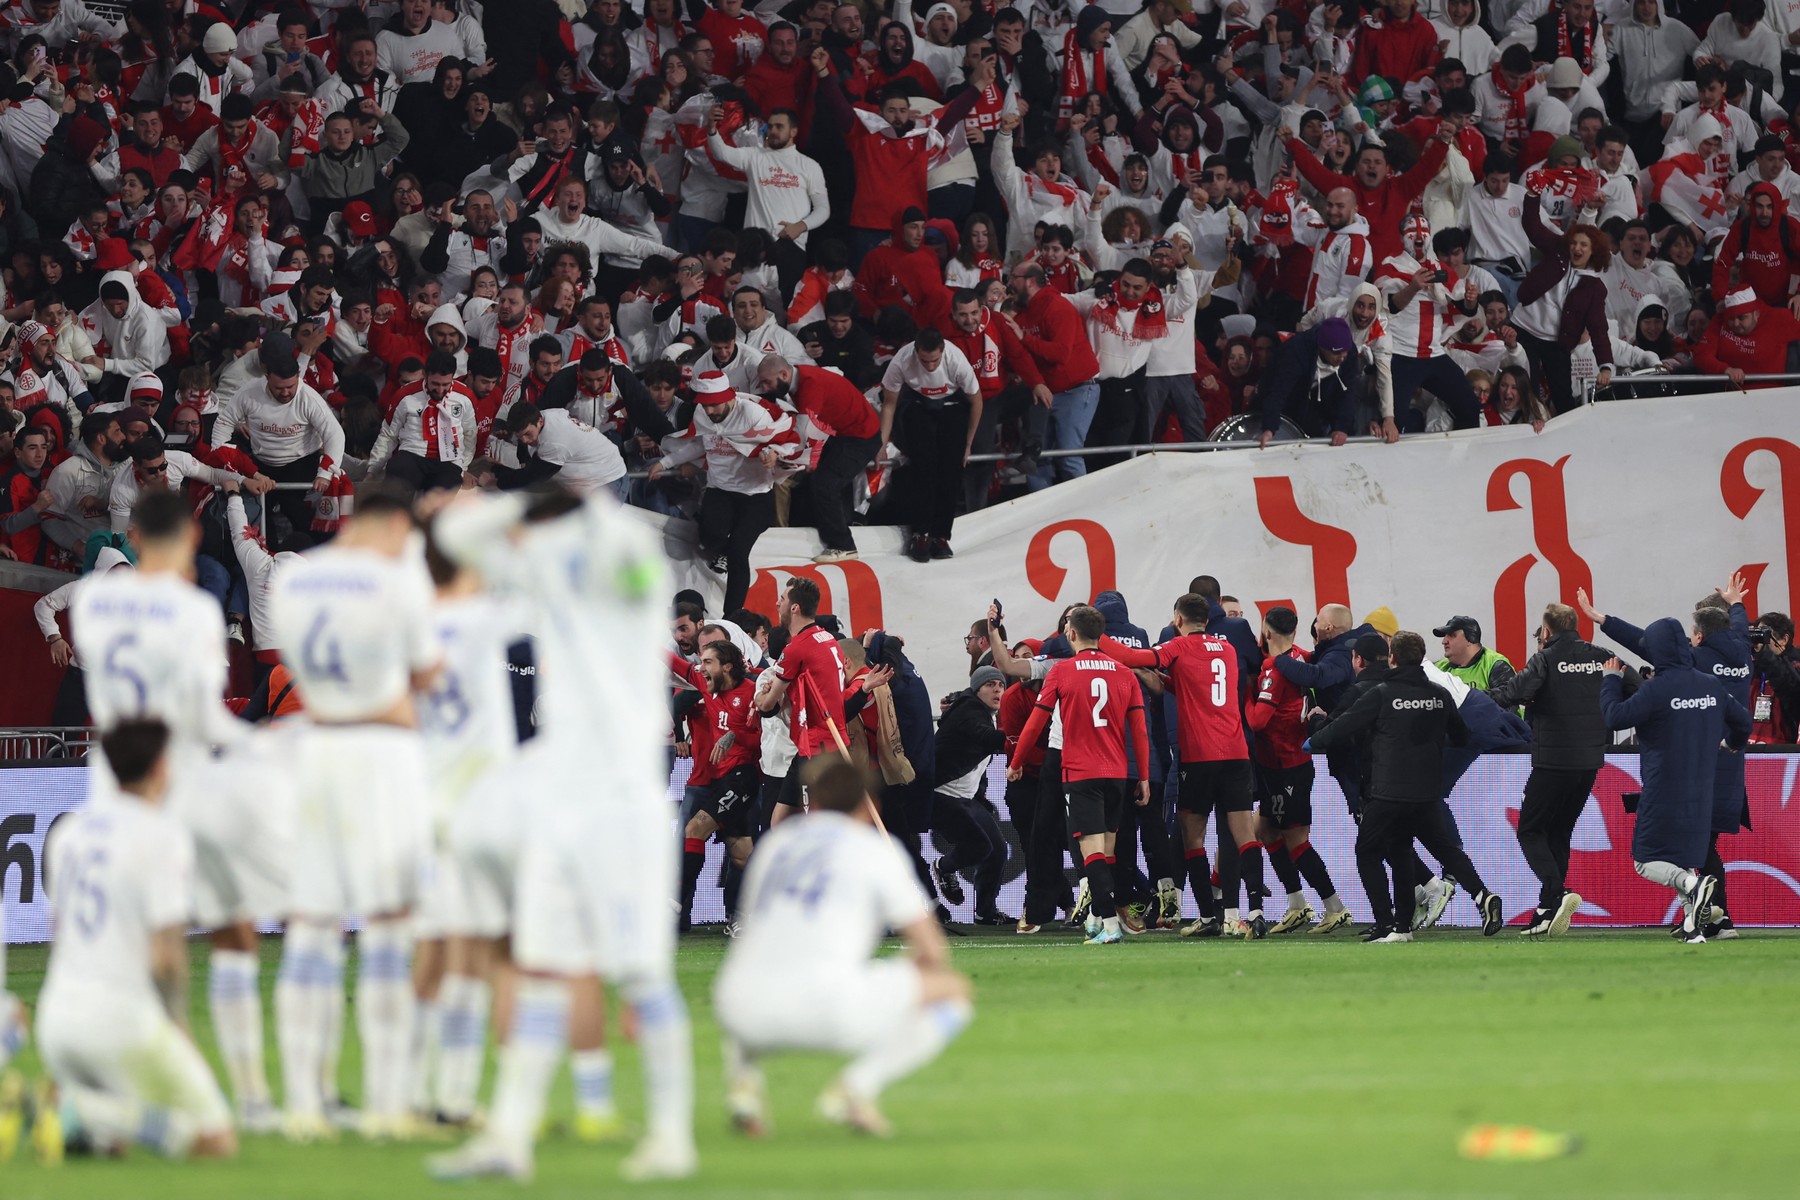 Georgia's players celebrate winning the UEFA EURO 2024 qualifying play-off final football match between Georgia and Greece in Tbilisi on March 26, 2024.,Image: 859815039, License: Rights-managed, Restrictions: , Model Release: no, Credit line: Giorgi ARJEVANIDZE / AFP / Profimedia